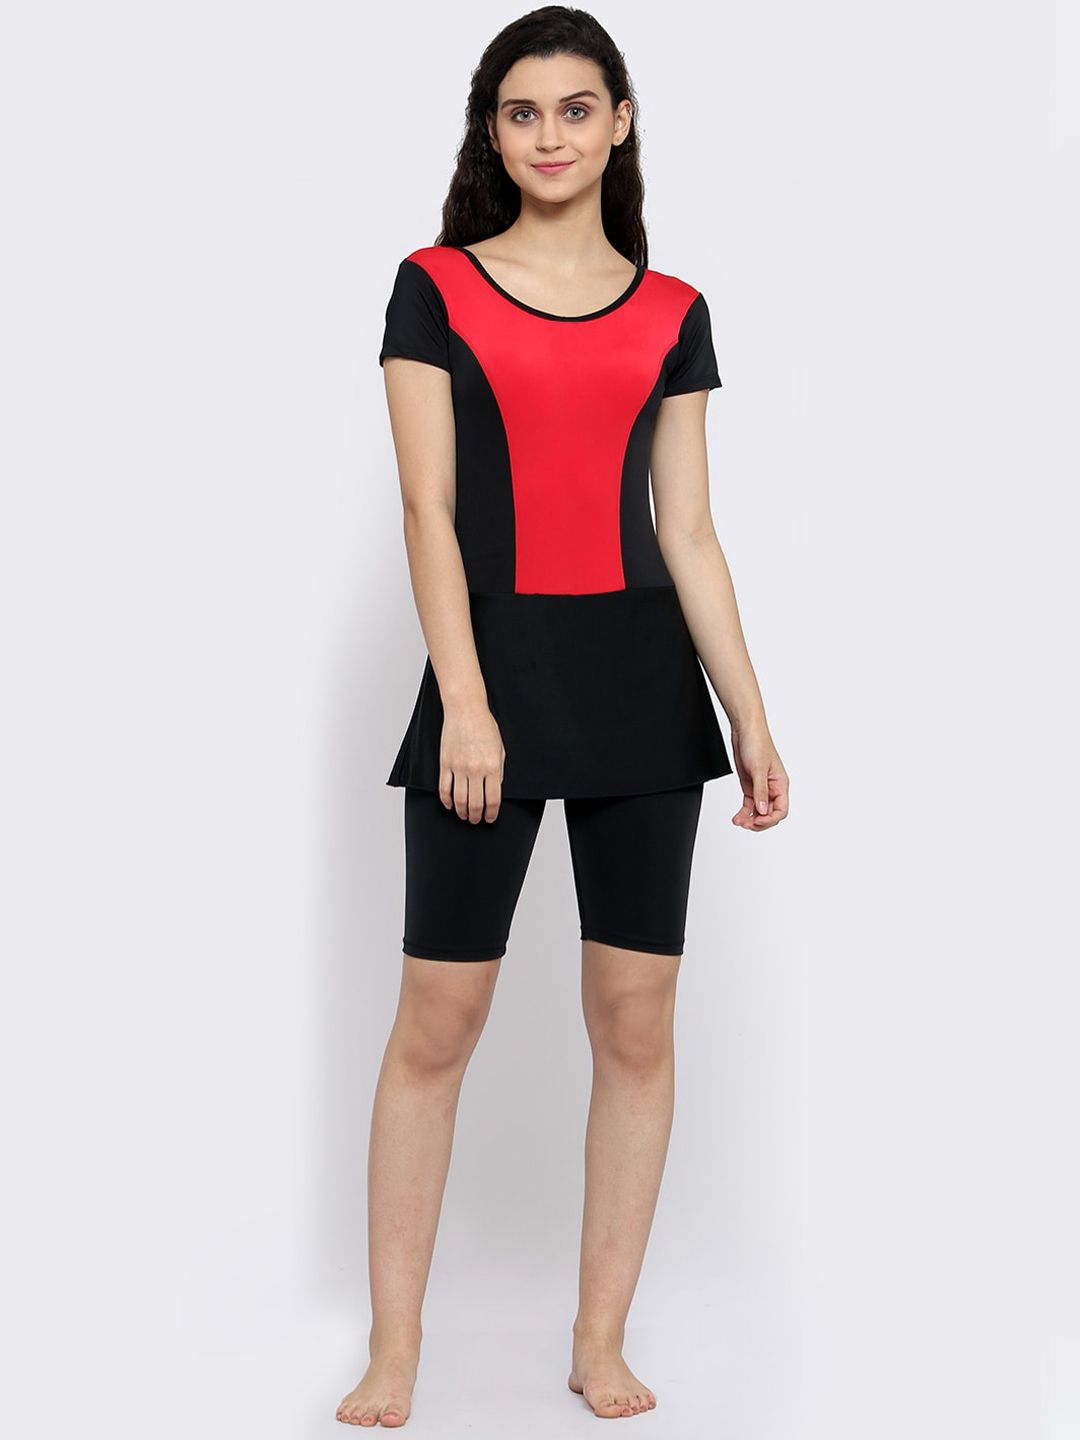 CUKOO Women Red & Black Colourblocked Comfort-Fit Swimming Dress With Attached Shorts Price in India